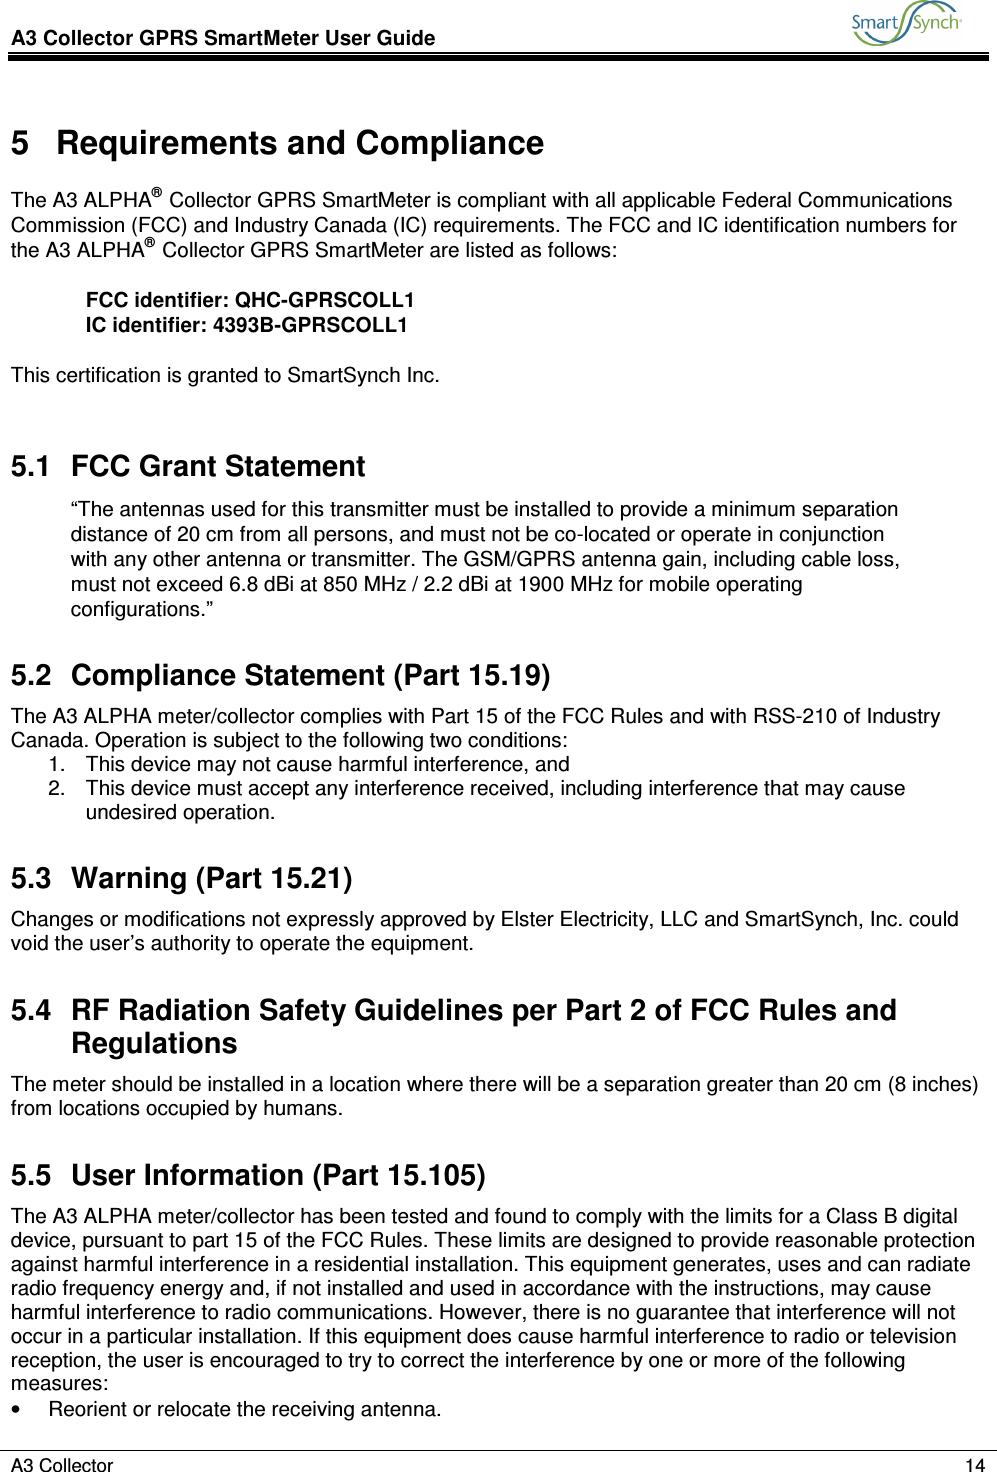 A3 Collector GPRS SmartMeter User Guide           A3 Collector    14  5  Requirements and Compliance The A3 ALPHA® Collector GPRS SmartMeter is compliant with all applicable Federal Communications Commission (FCC) and Industry Canada (IC) requirements. The FCC and IC identification numbers for the A3 ALPHA® Collector GPRS SmartMeter are listed as follows:  FCC identifier: QHC-GPRSCOLL1 IC identifier: 4393B-GPRSCOLL1  This certification is granted to SmartSynch Inc.  5.1  FCC Grant Statement “The antennas used for this transmitter must be installed to provide a minimum separation distance of 20 cm from all persons, and must not be co-located or operate in conjunction with any other antenna or transmitter. The GSM/GPRS antenna gain, including cable loss, must not exceed 6.8 dBi at 850 MHz / 2.2 dBi at 1900 MHz for mobile operating configurations.” 5.2  Compliance Statement (Part 15.19) The A3 ALPHA meter/collector complies with Part 15 of the FCC Rules and with RSS-210 of Industry Canada. Operation is subject to the following two conditions: 1.  This device may not cause harmful interference, and 2.  This device must accept any interference received, including interference that may cause undesired operation. 5.3  Warning (Part 15.21) Changes or modifications not expressly approved by Elster Electricity, LLC and SmartSynch, Inc. could void the user’s authority to operate the equipment. 5.4  RF Radiation Safety Guidelines per Part 2 of FCC Rules and Regulations The meter should be installed in a location where there will be a separation greater than 20 cm (8 inches) from locations occupied by humans. 5.5  User Information (Part 15.105) The A3 ALPHA meter/collector has been tested and found to comply with the limits for a Class B digital device, pursuant to part 15 of the FCC Rules. These limits are designed to provide reasonable protection against harmful interference in a residential installation. This equipment generates, uses and can radiate radio frequency energy and, if not installed and used in accordance with the instructions, may cause harmful interference to radio communications. However, there is no guarantee that interference will not occur in a particular installation. If this equipment does cause harmful interference to radio or television reception, the user is encouraged to try to correct the interference by one or more of the following measures: •  Reorient or relocate the receiving antenna. 